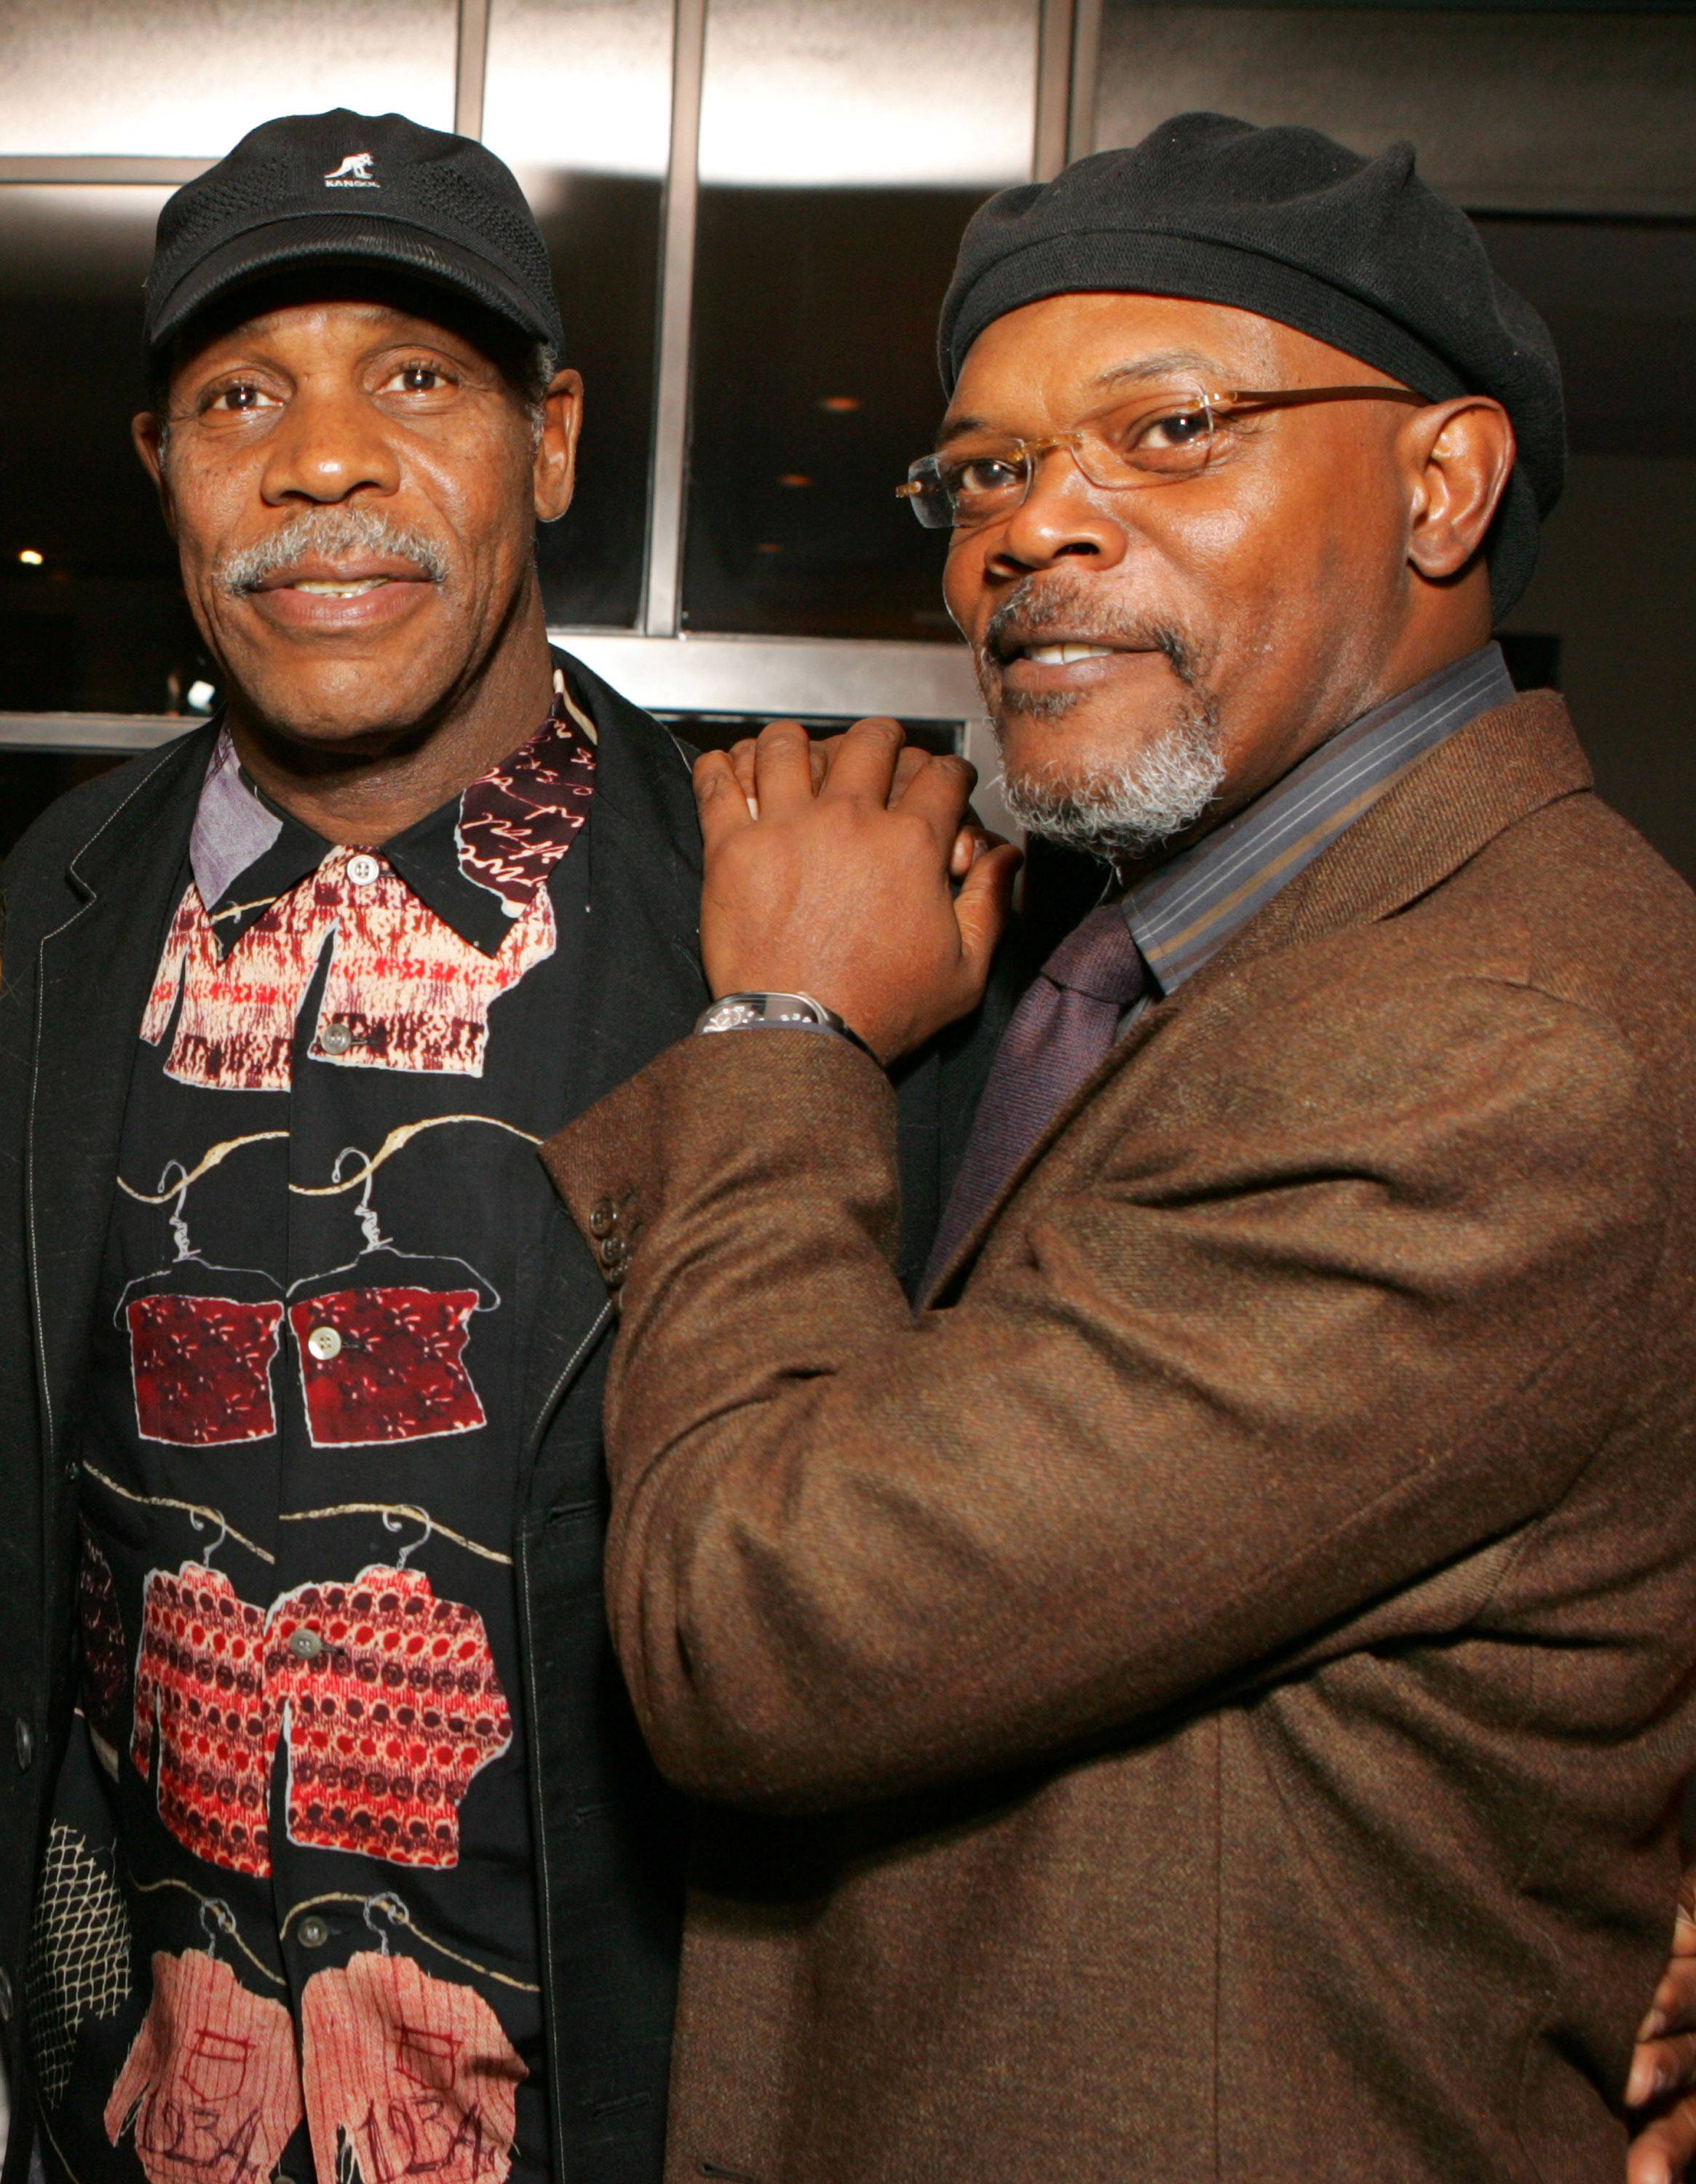 Danny Glover and Samuel L. Jackson on BET Buzz 2021